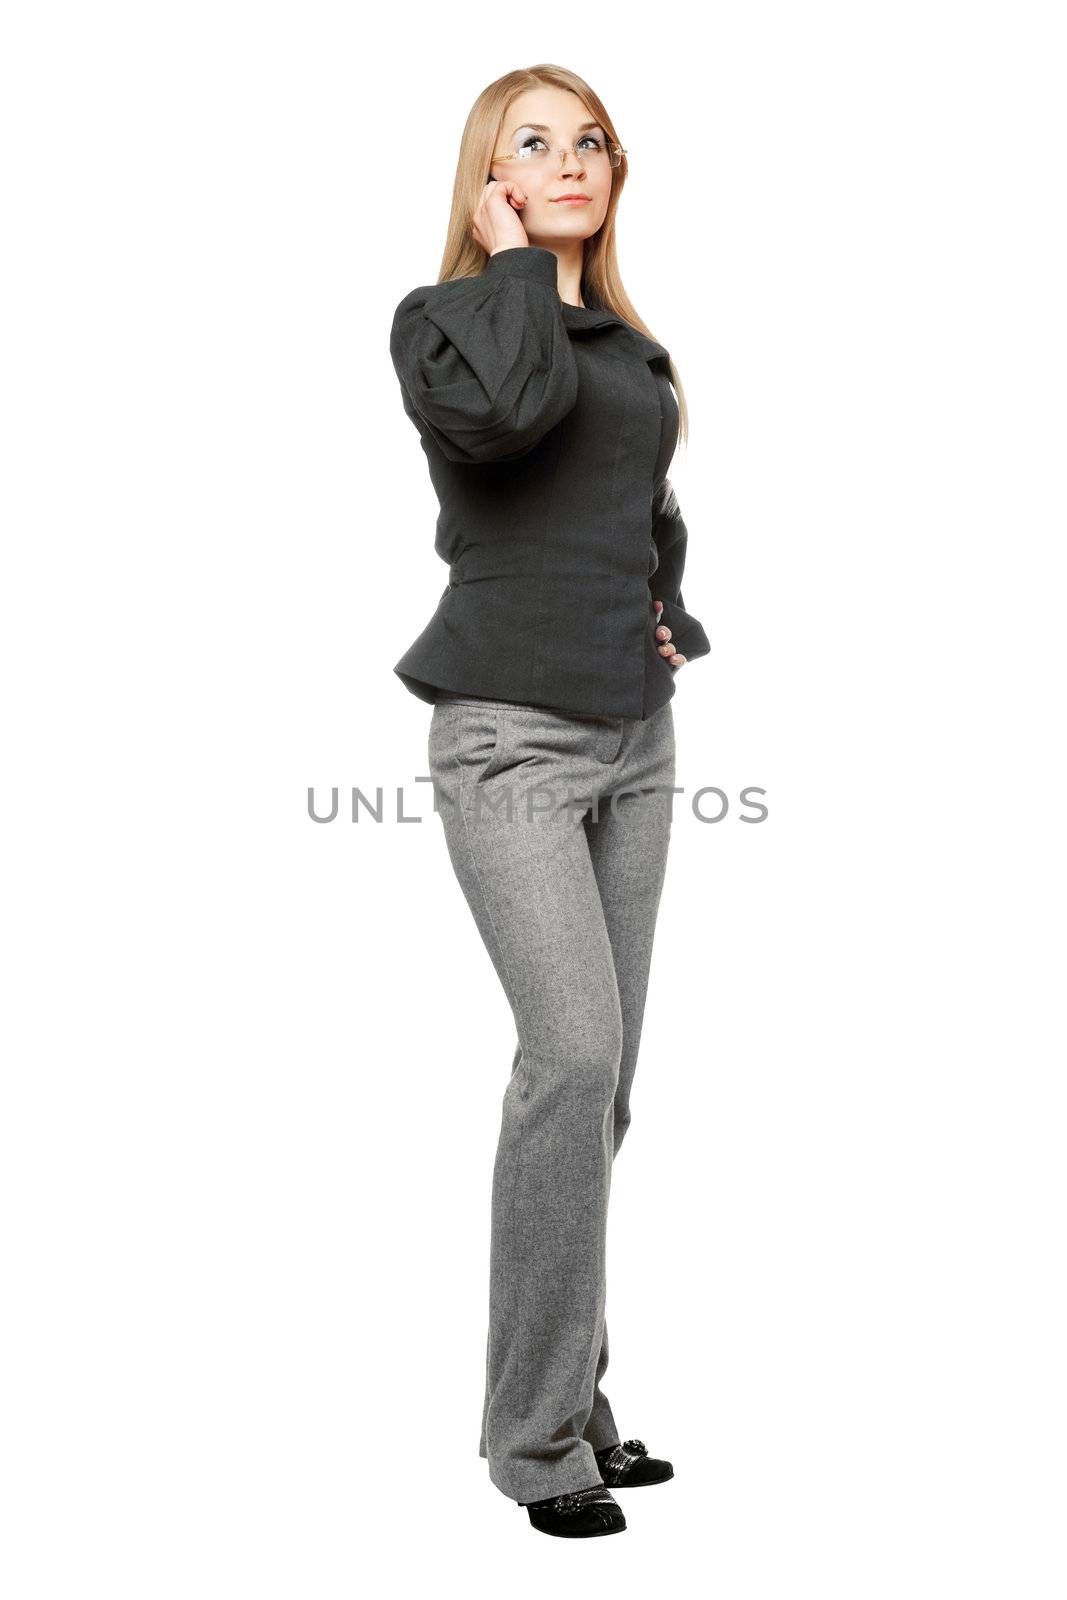 Serious young woman in a gray business suit talking on the phone